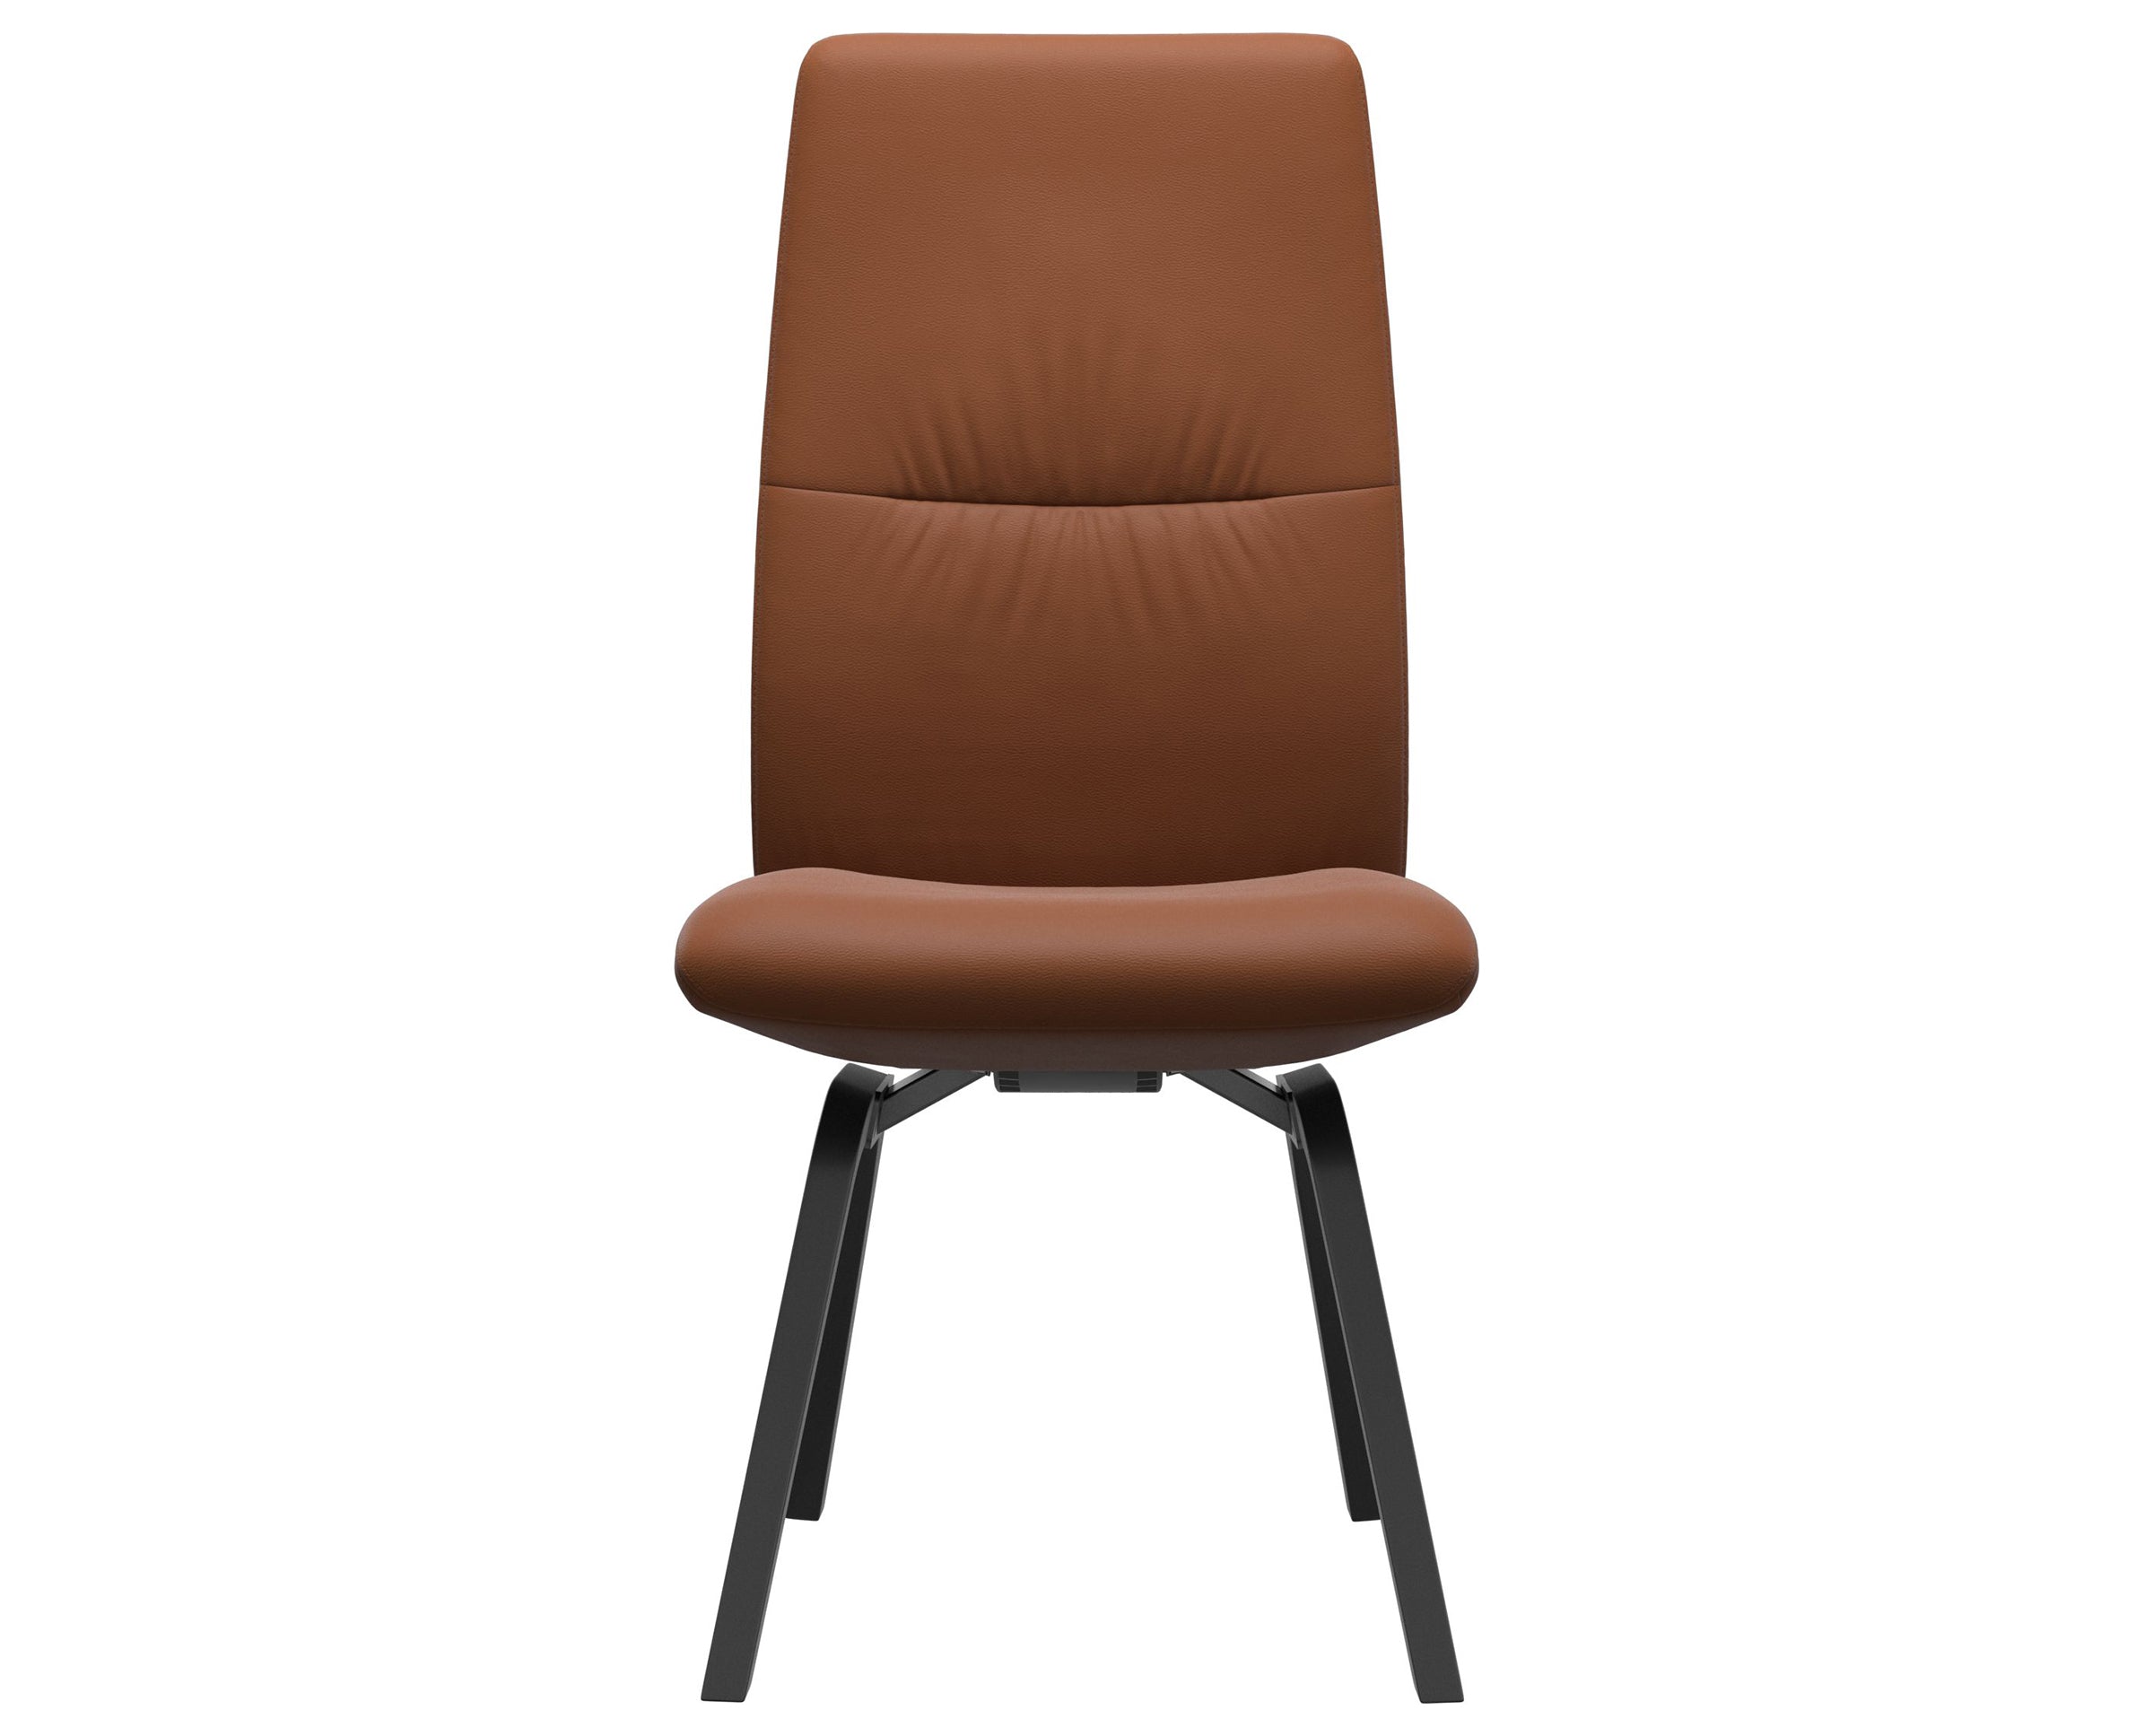 Paloma Leather New Cognac and Black Base | Stressless Mint High Back D200 Dining Chair | Valley Ridge Furniture